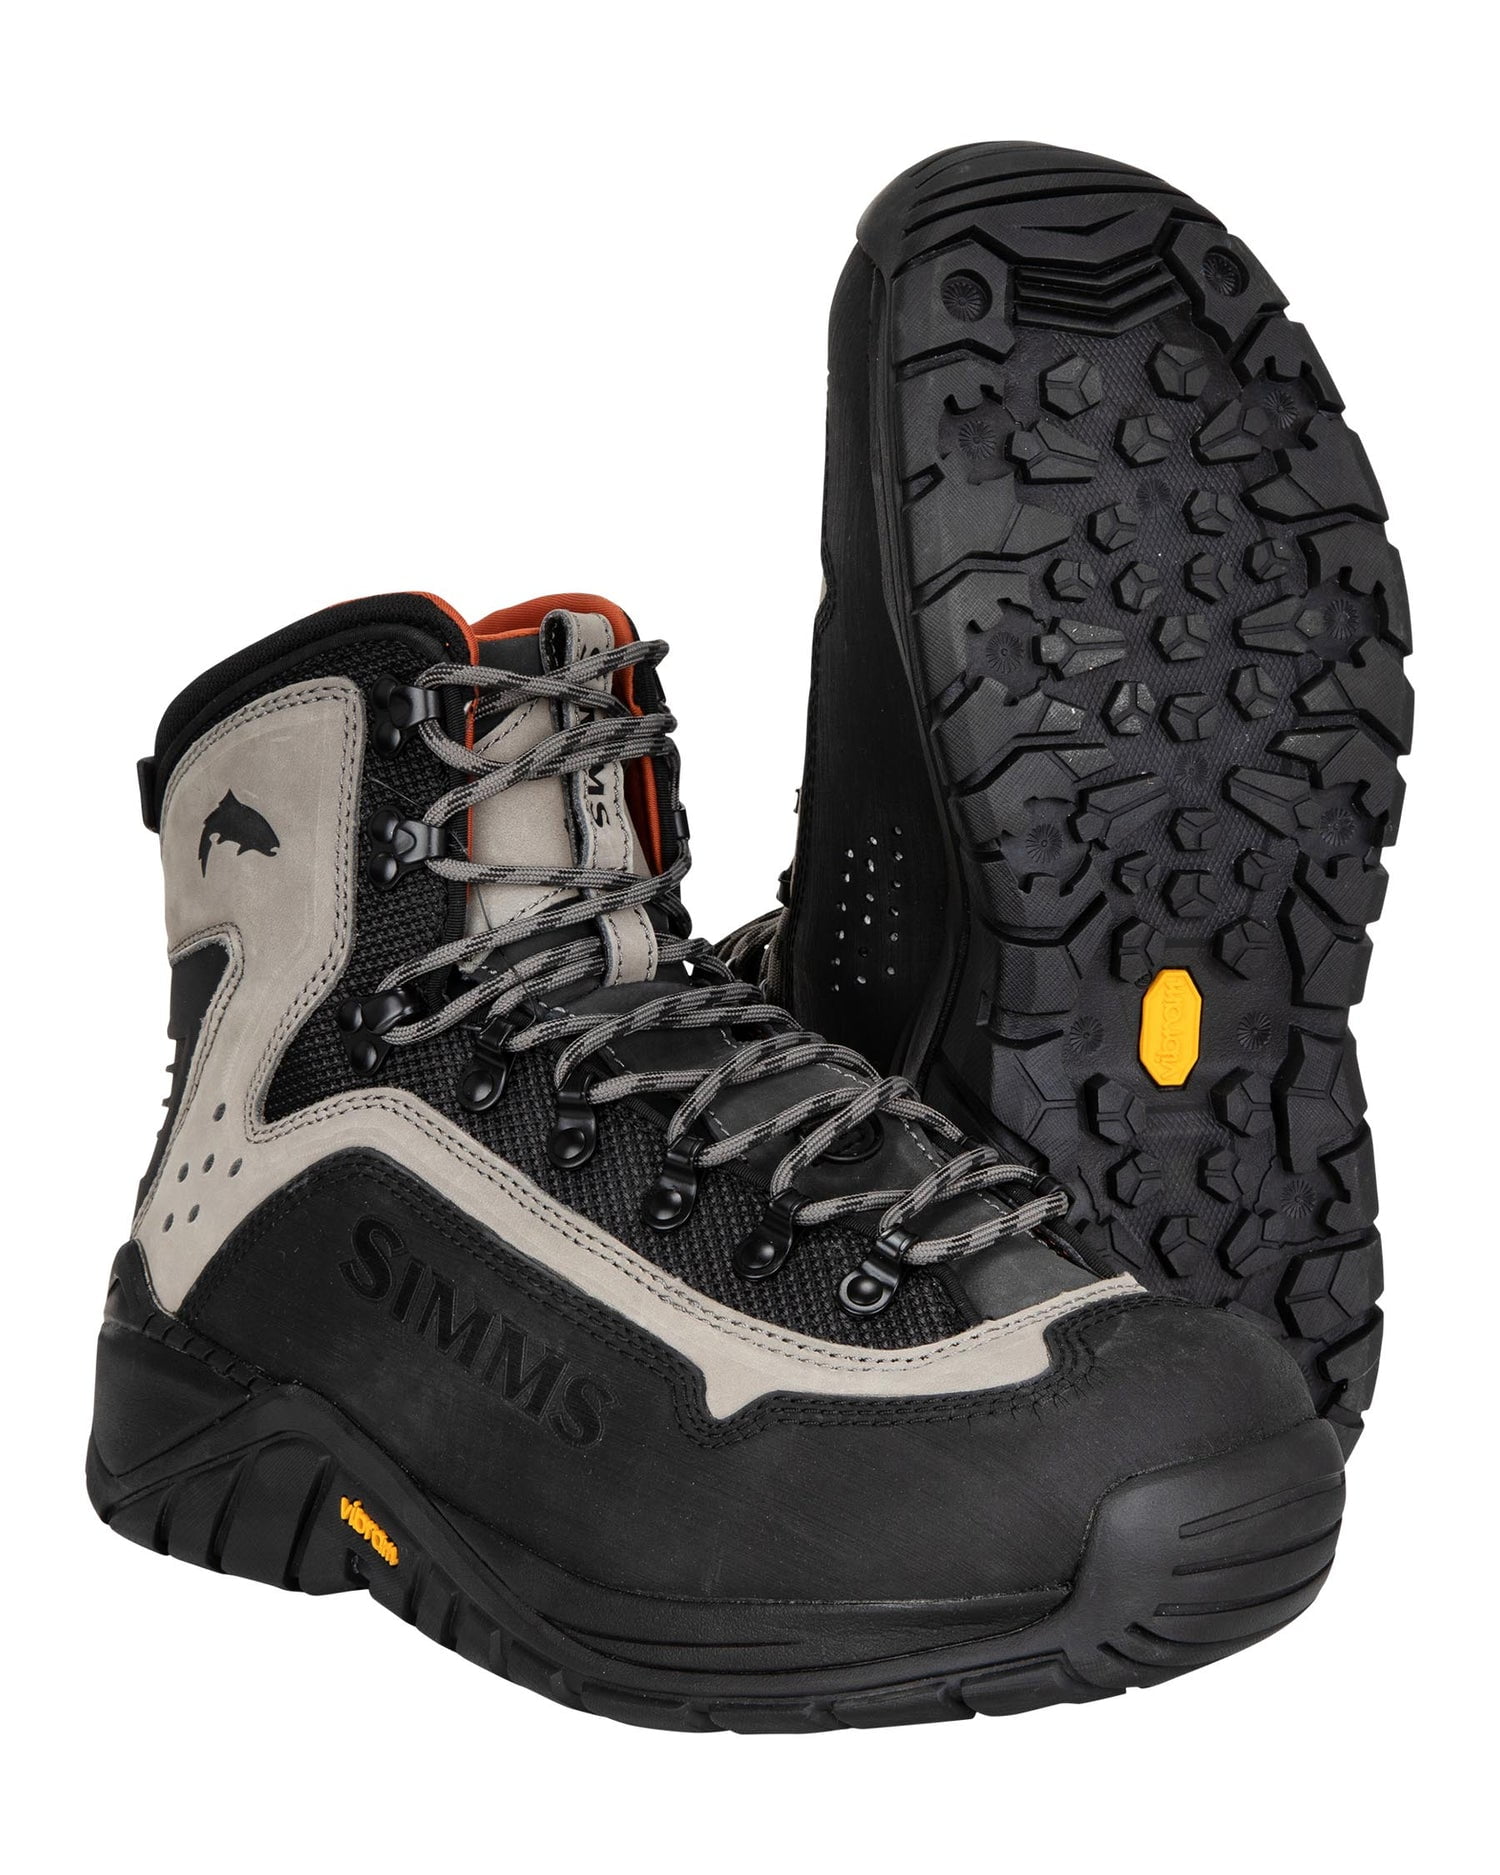  Wide Width Fishing Wading Boots